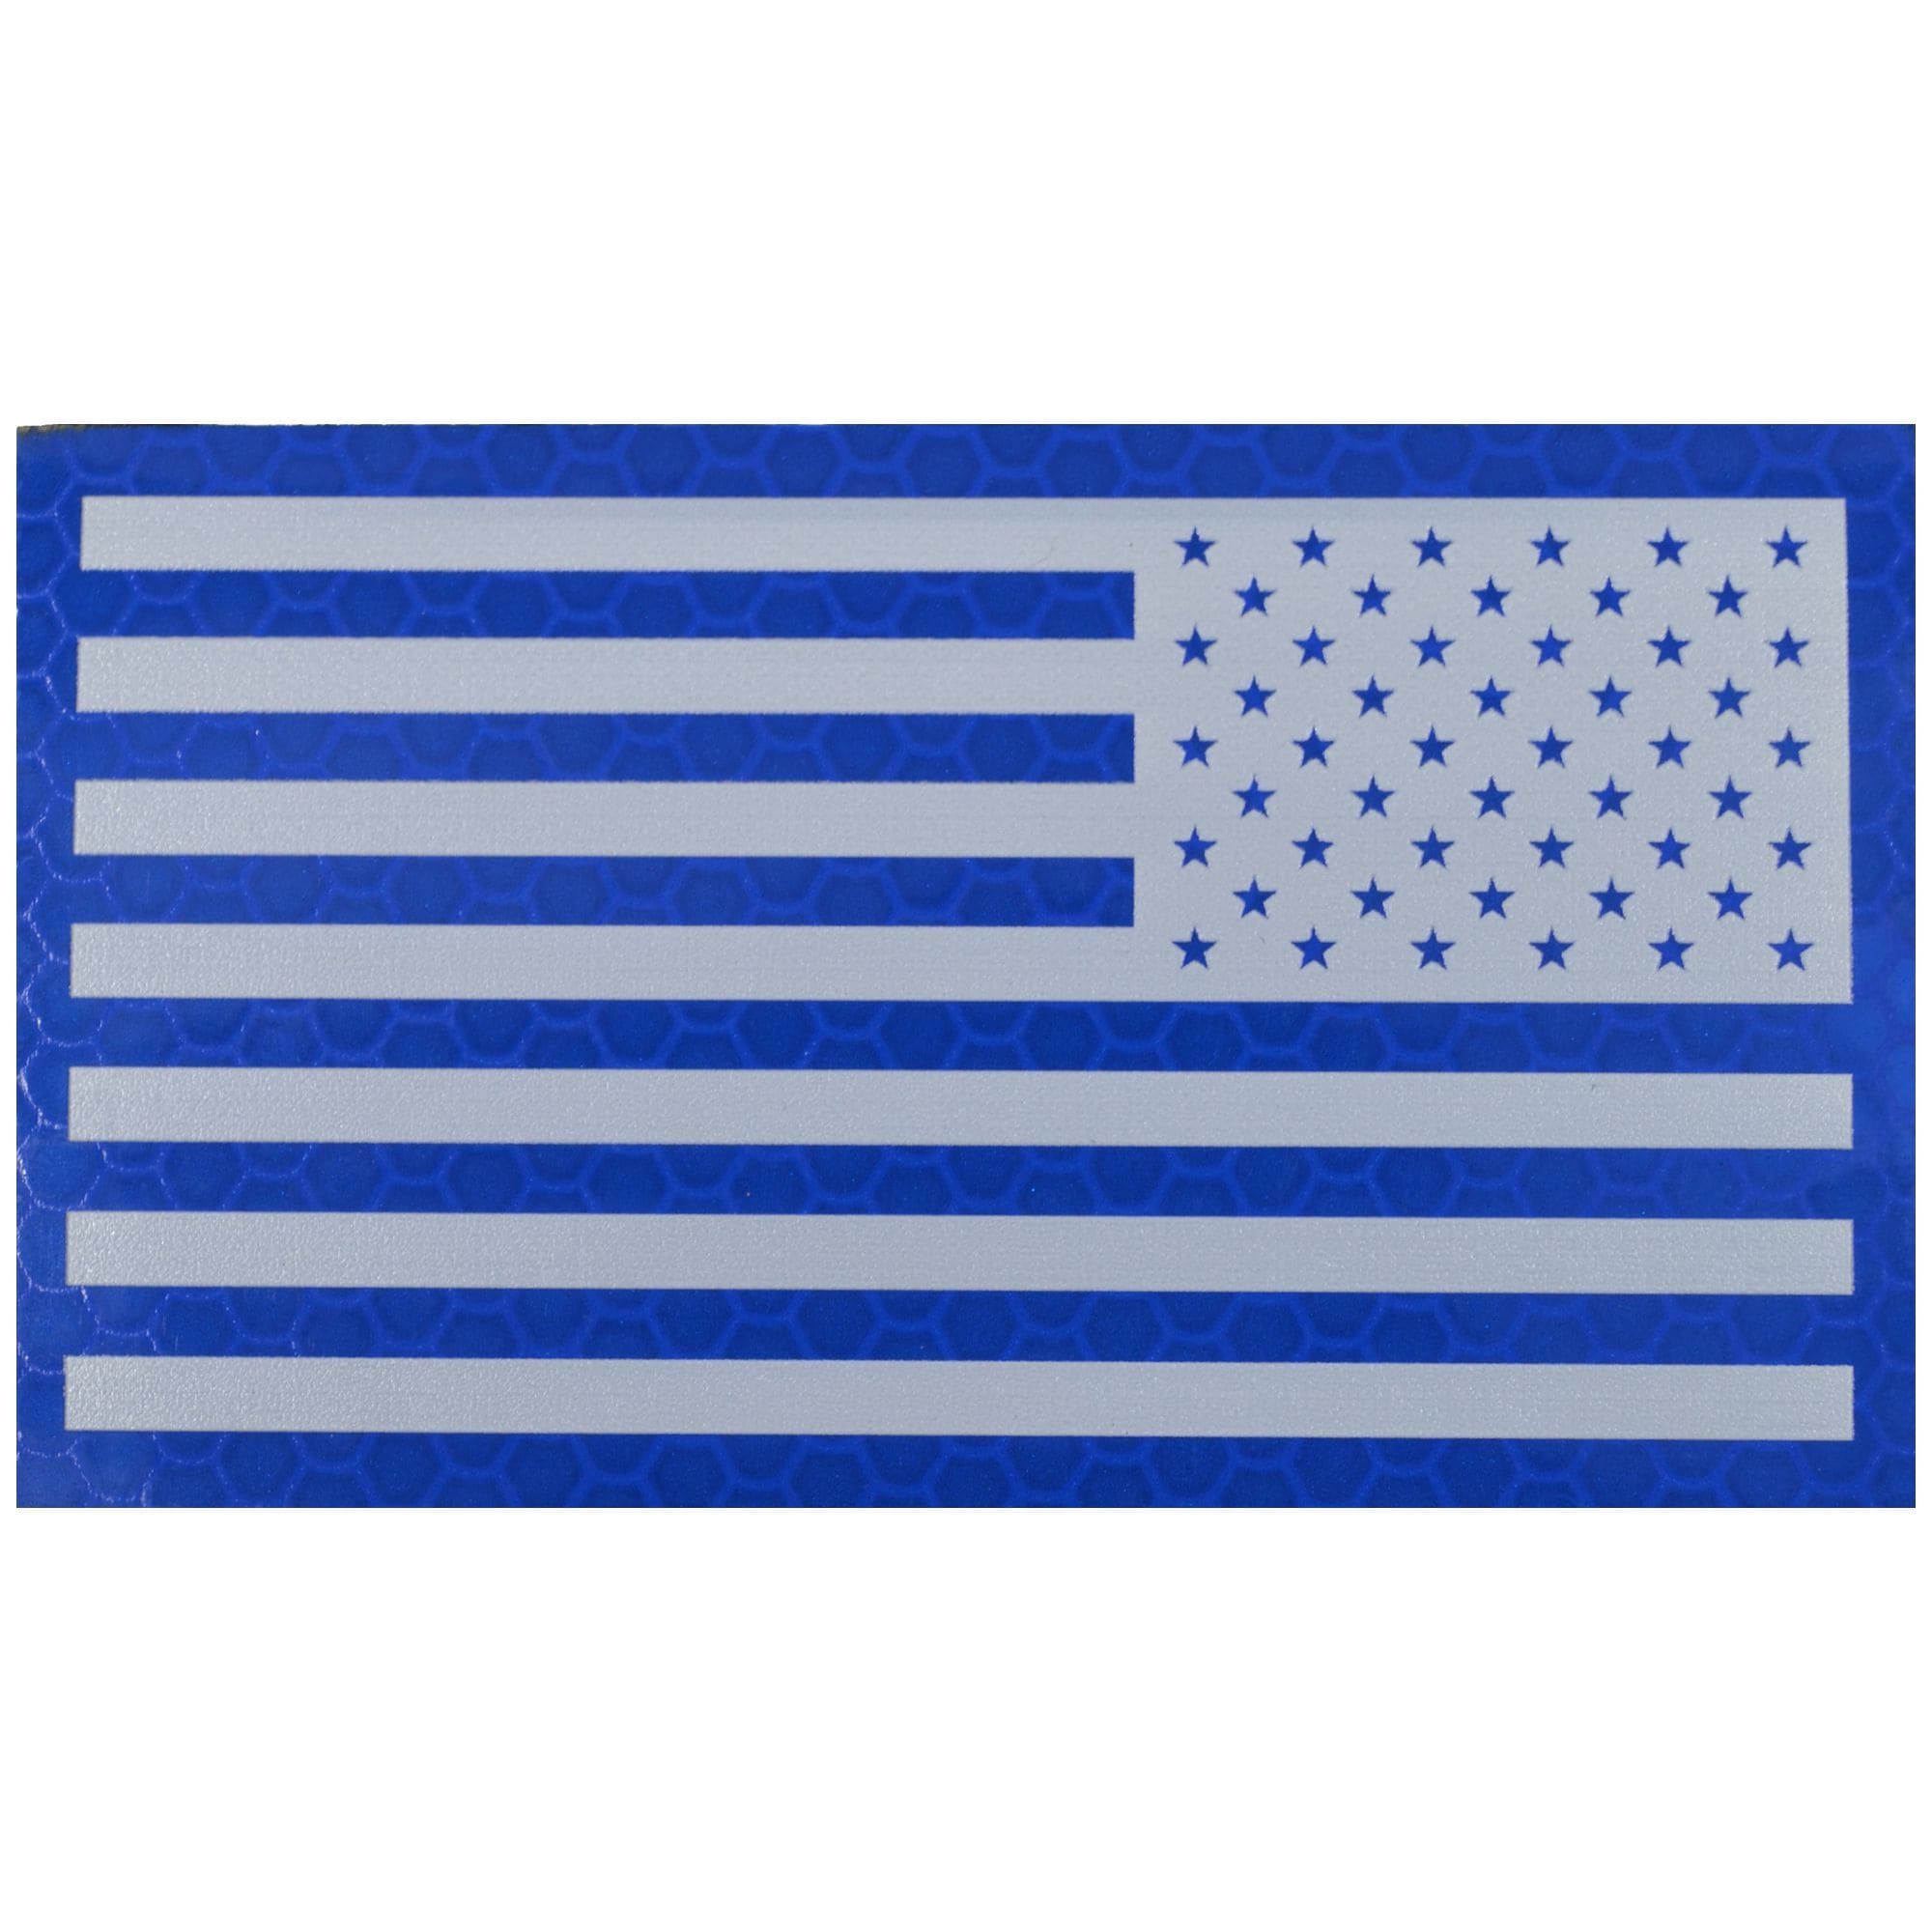 Tactical Gear Junkie Patches Reverse Reflective Printed Blue/White USA Flag - 2x3.5 Patch